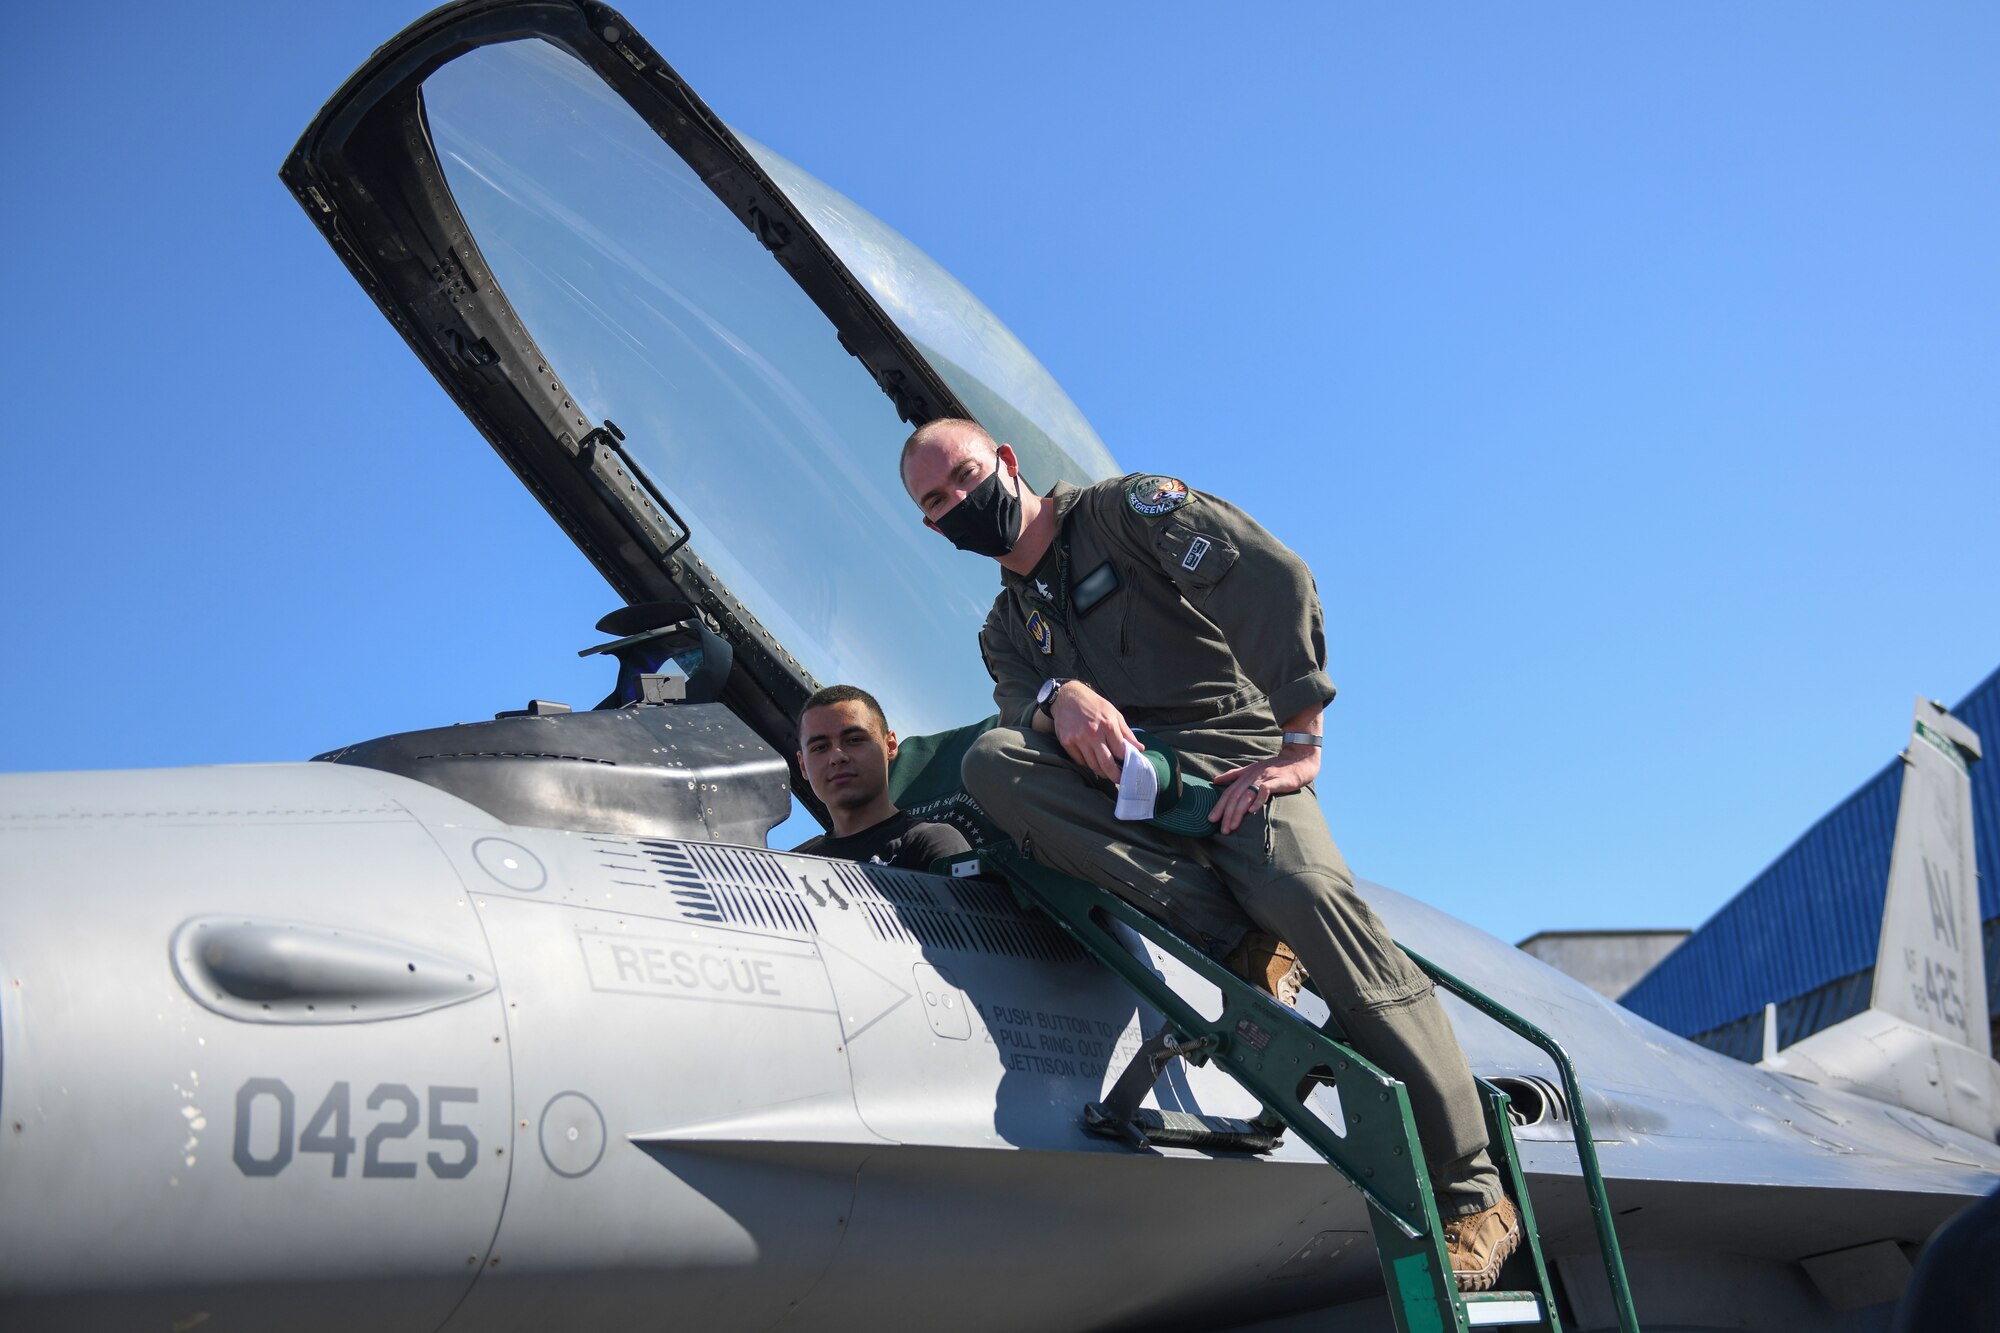 A U.S. Air Force pilot from the 555th Fighter Squadron, Aviano Air Base, Italy, and a student from First English Language School, Sofia, Bulgaria, pose for a photo, Oct. 2, 2020, at Graf Ignatievo Air Base, Bulgaria. The students met with both a pilot and a crew chief for about 25 minutes and discussed the various parts of a U.S. Air Force F-16 Fighting Falcon. During their visit, the students had the opportunity to practice the English language while discussing the various parts of the aircraft. (U.S. Air Force photo by Airman 1st Class Ericka A. Woolever)